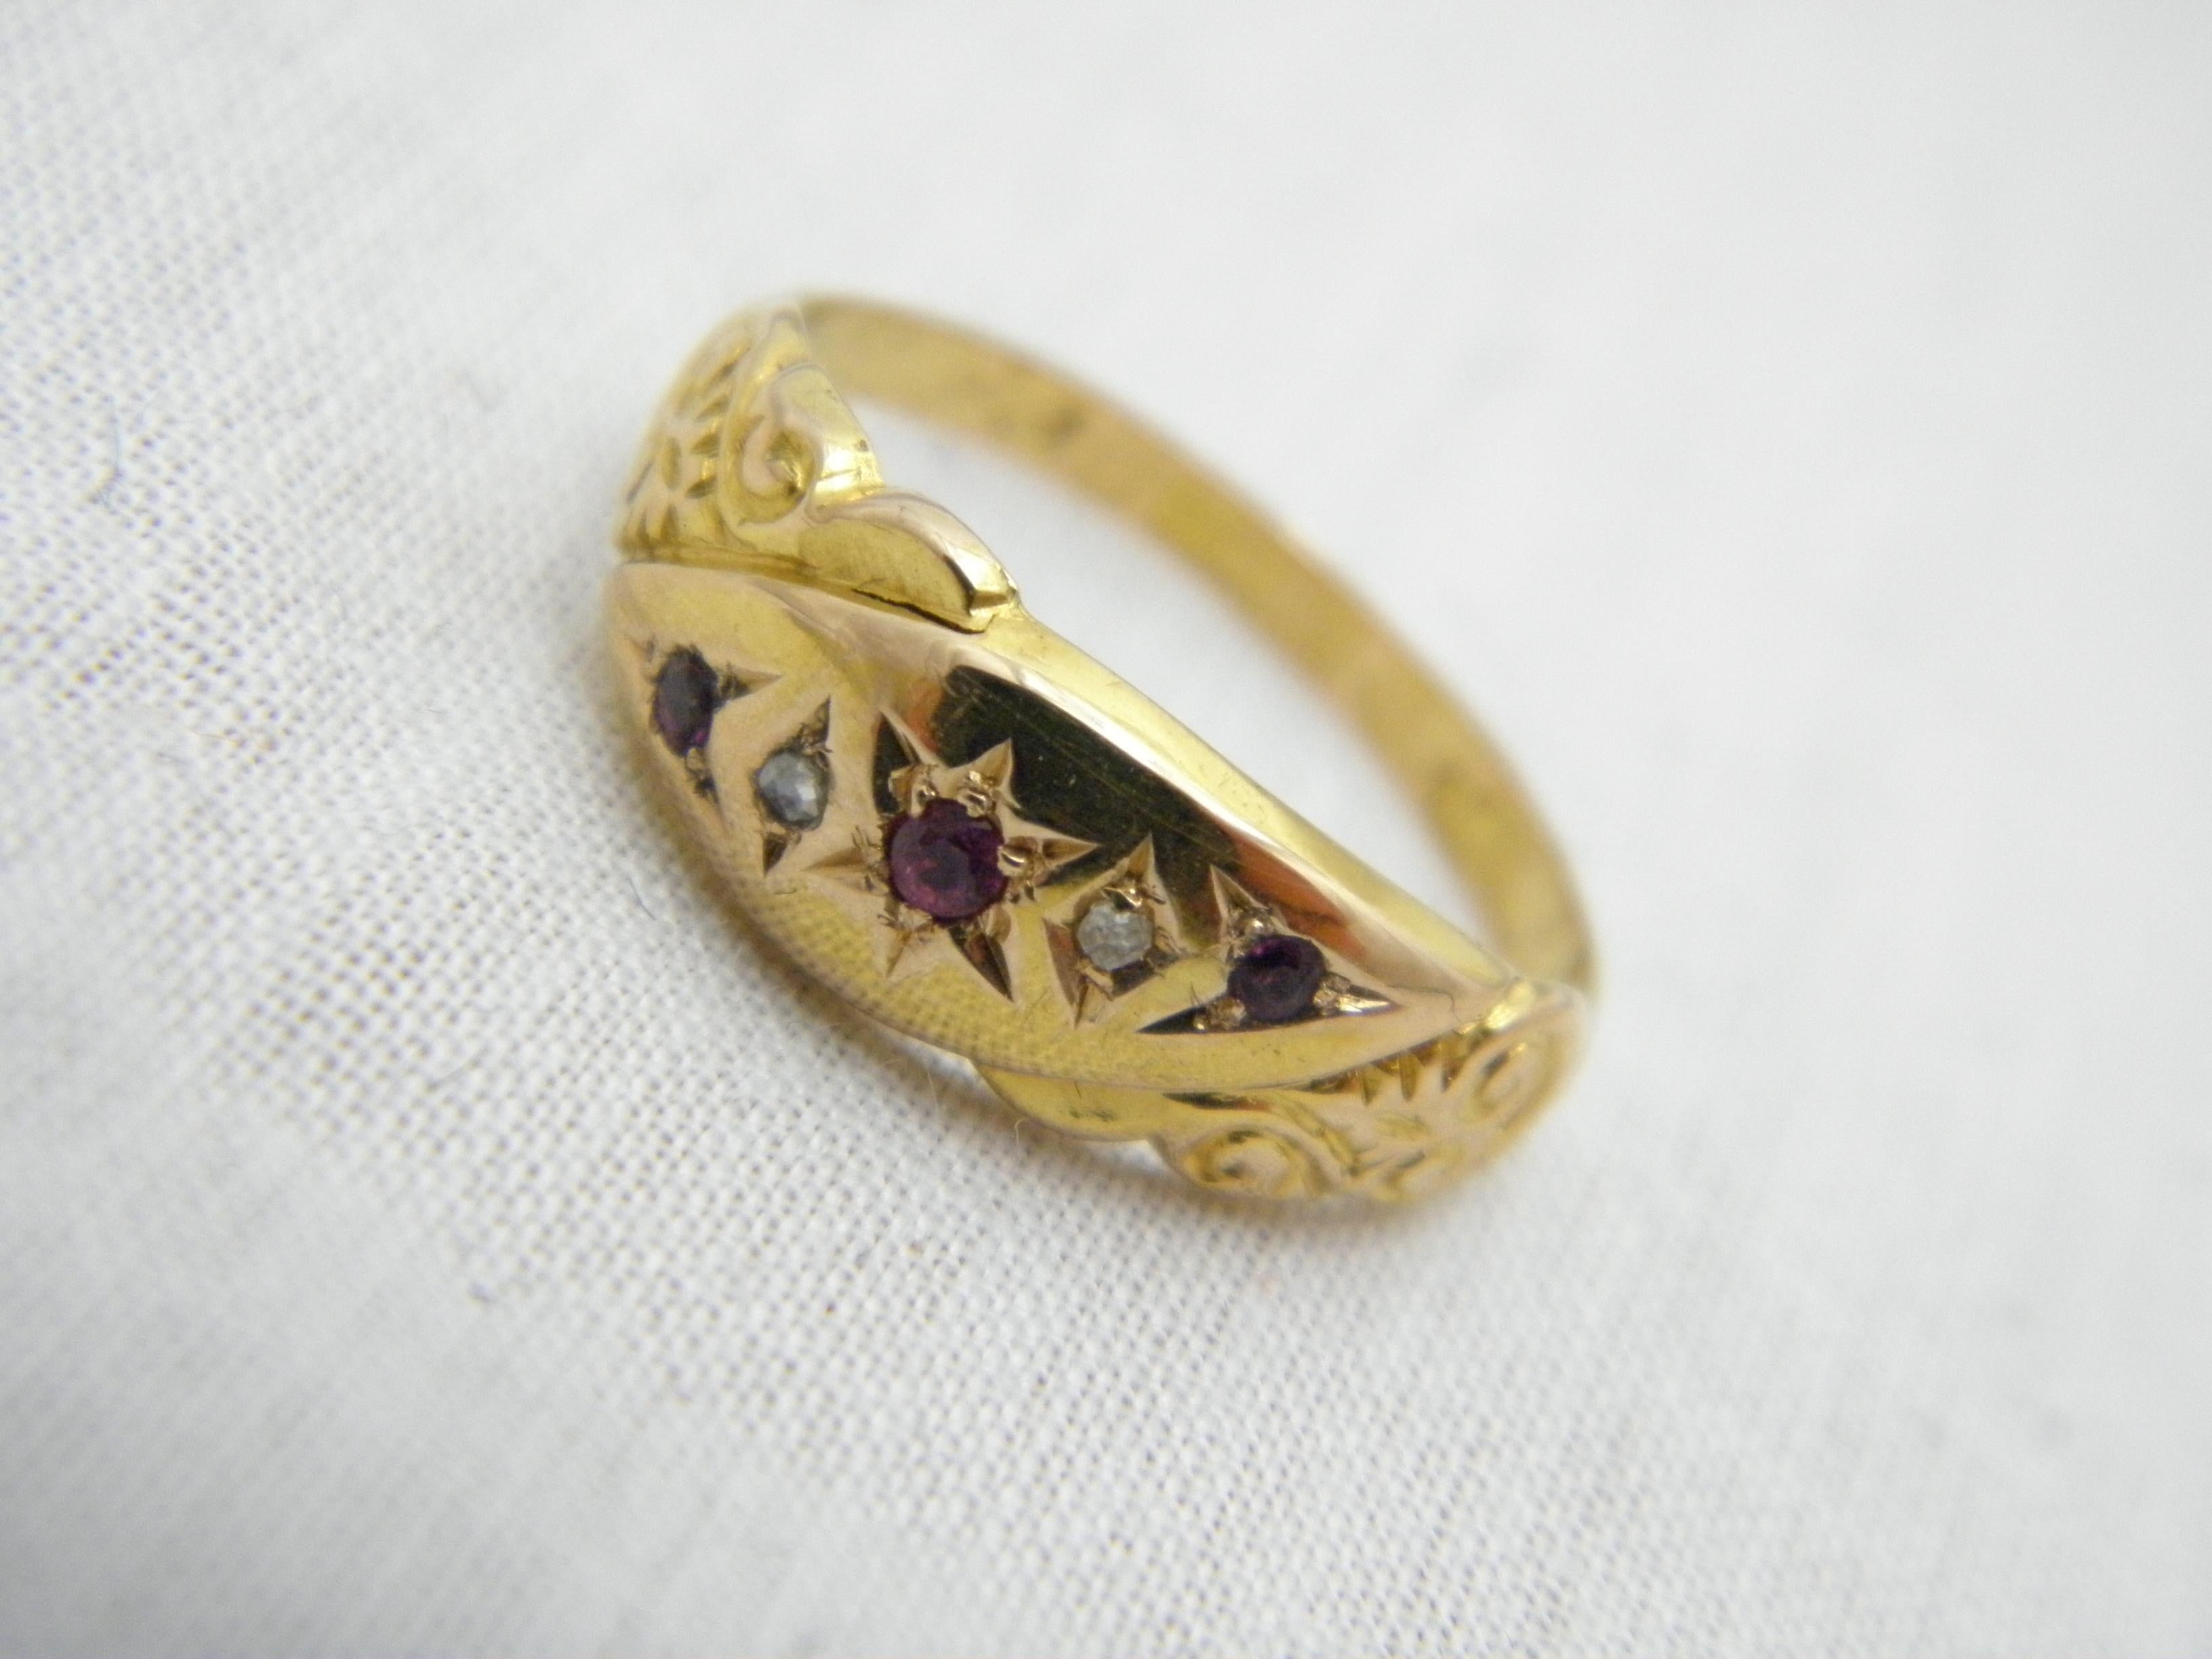 
For your consideration I have this amazing:

15CT GOLD ANTIQUE RUBY AND DIAMOND GYPSY BOAT RING

DETAILS
Material: 15ct 625/000 Rose/Yellow Gold
This ring has a thick and sturdy shank hence ideal if resizing needed
Style: Classic Gem Set Gypsy